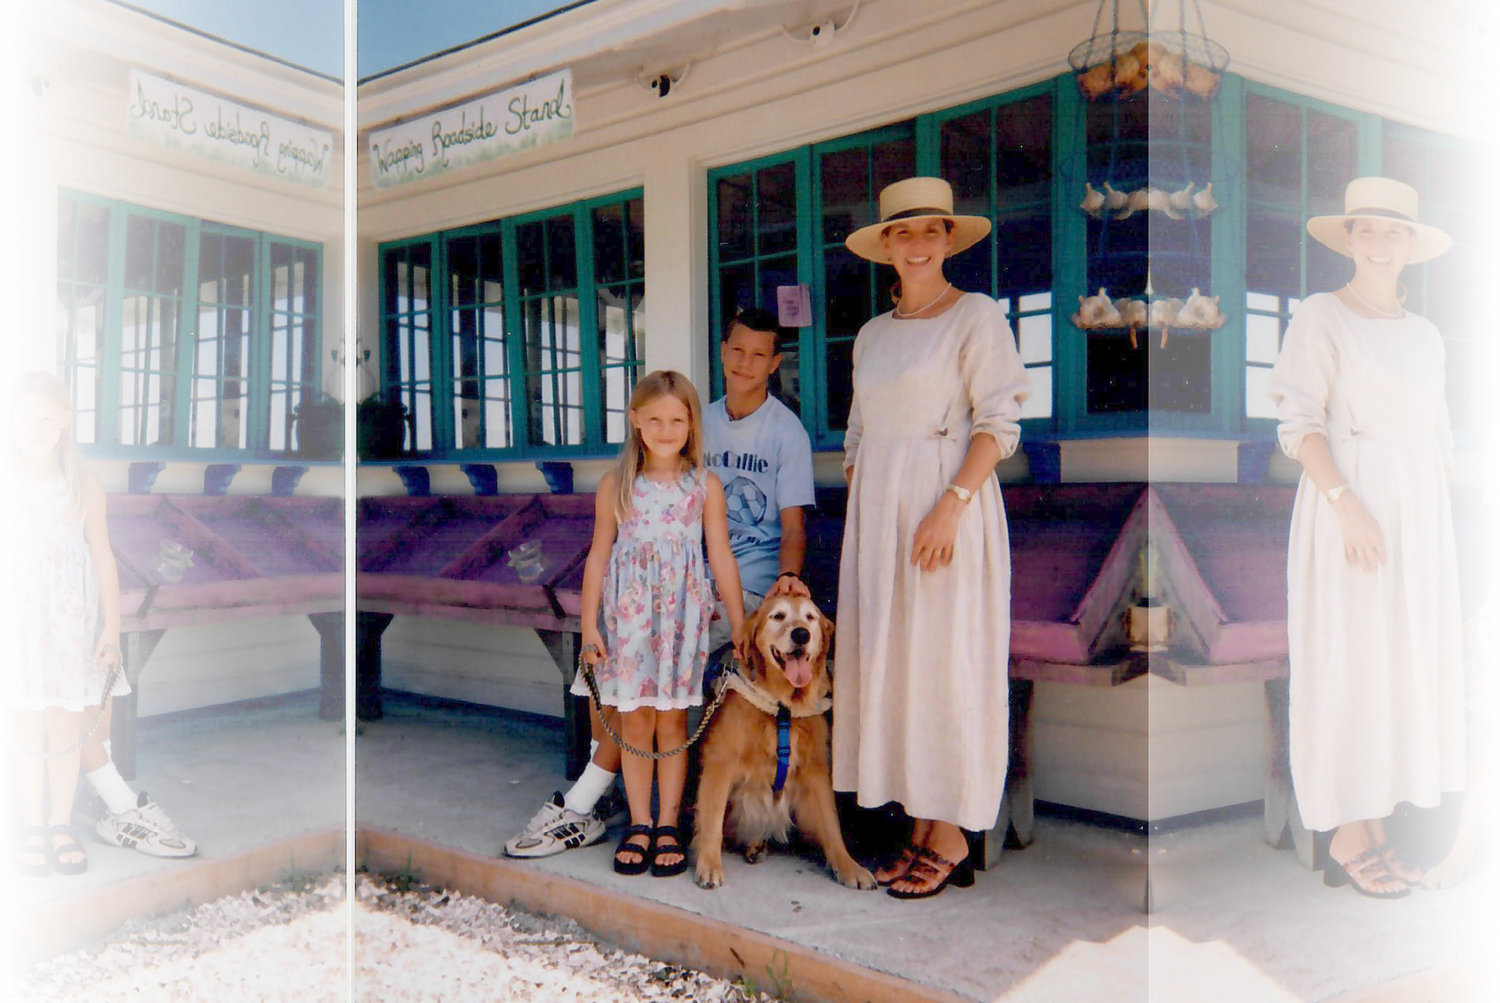 Brenda, Lela and a cousin at the original farmstand in 1999